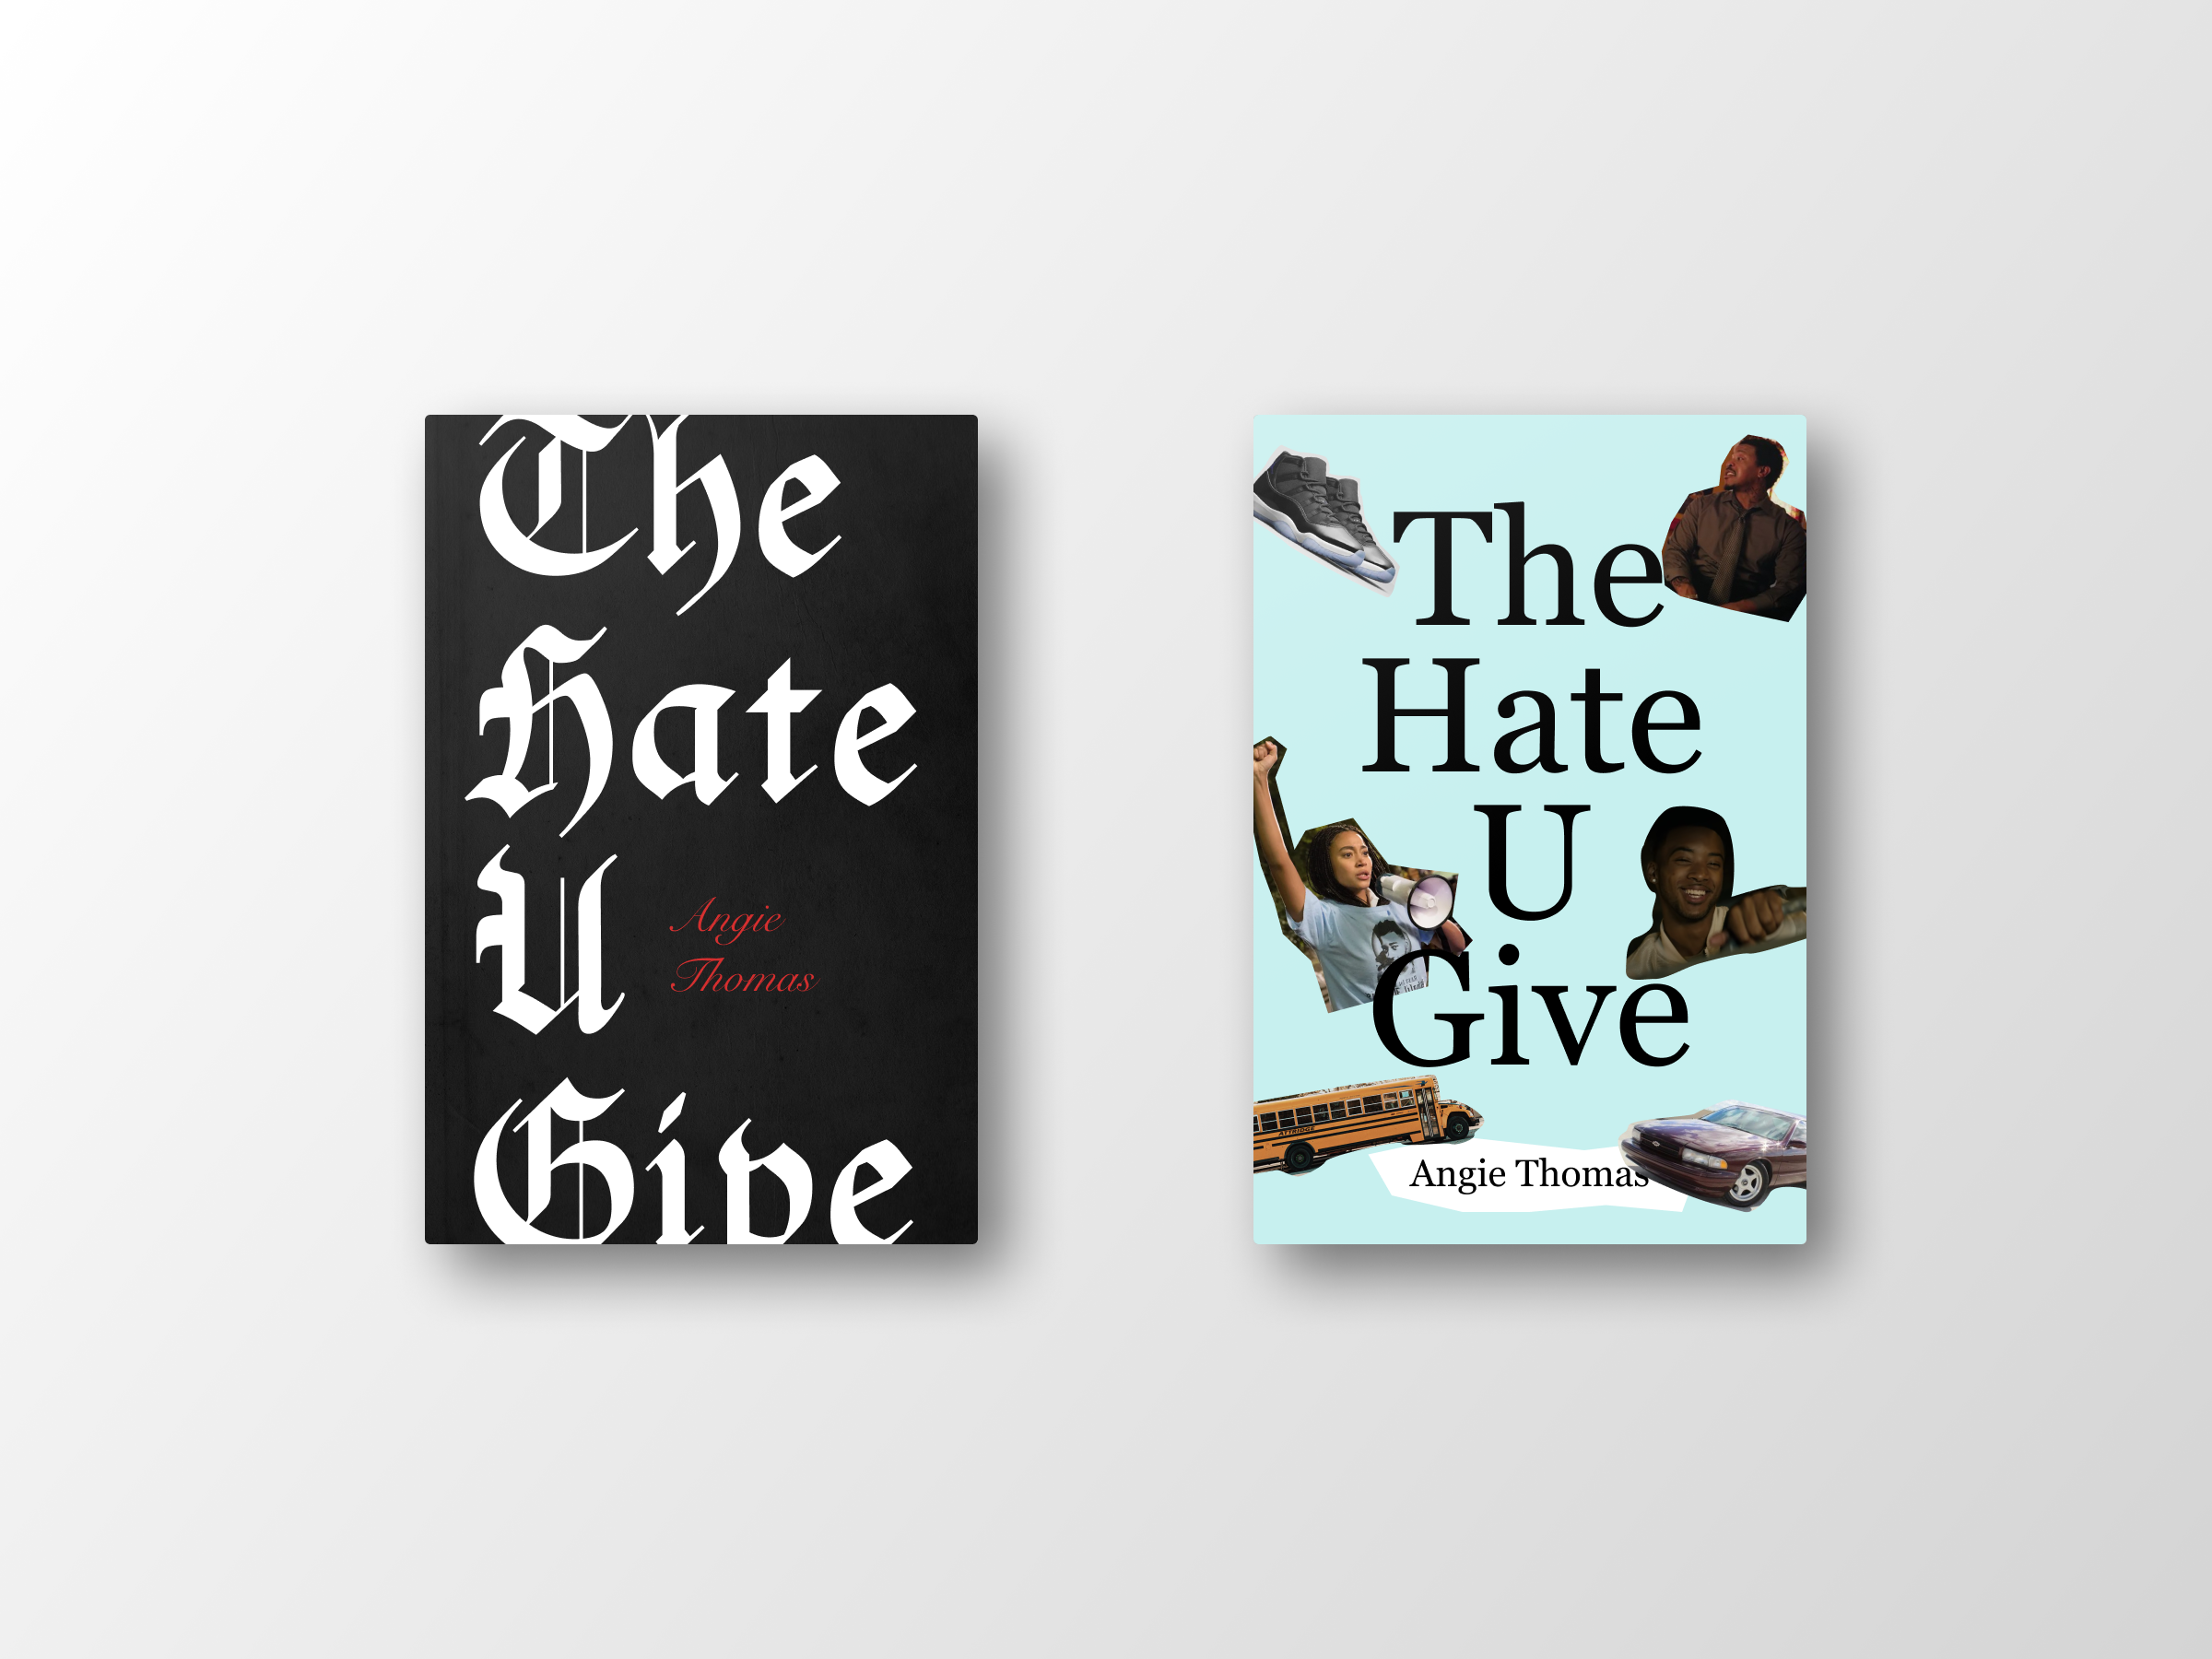 Give that book to. The hate u give book. The hate you give. The hate you give book.